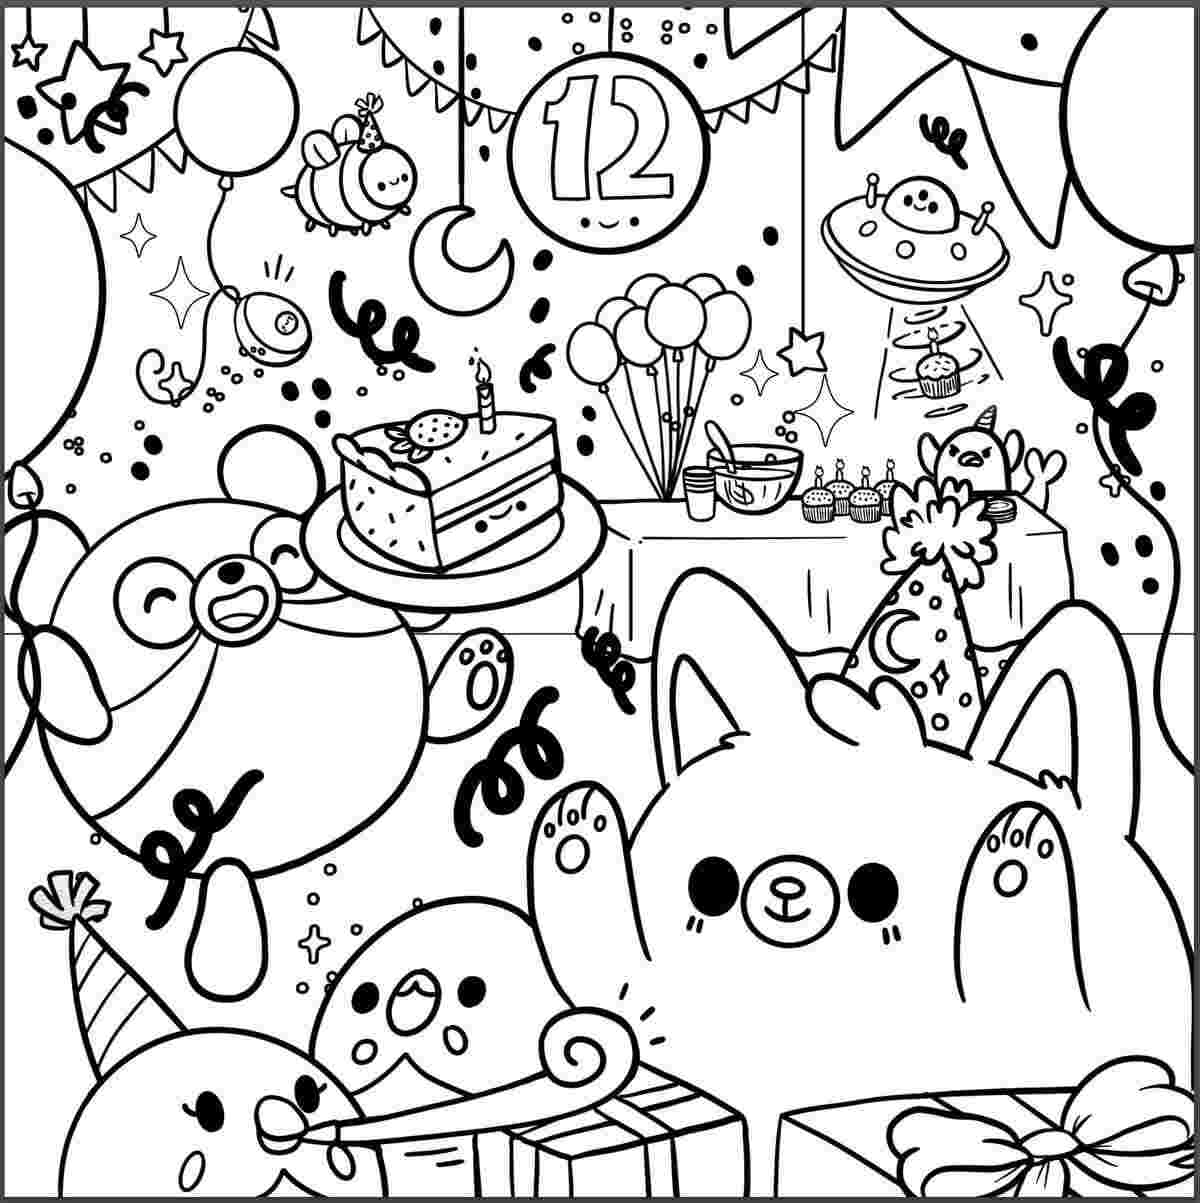 12th Birthday Party for Squishmallow Coloring Pages